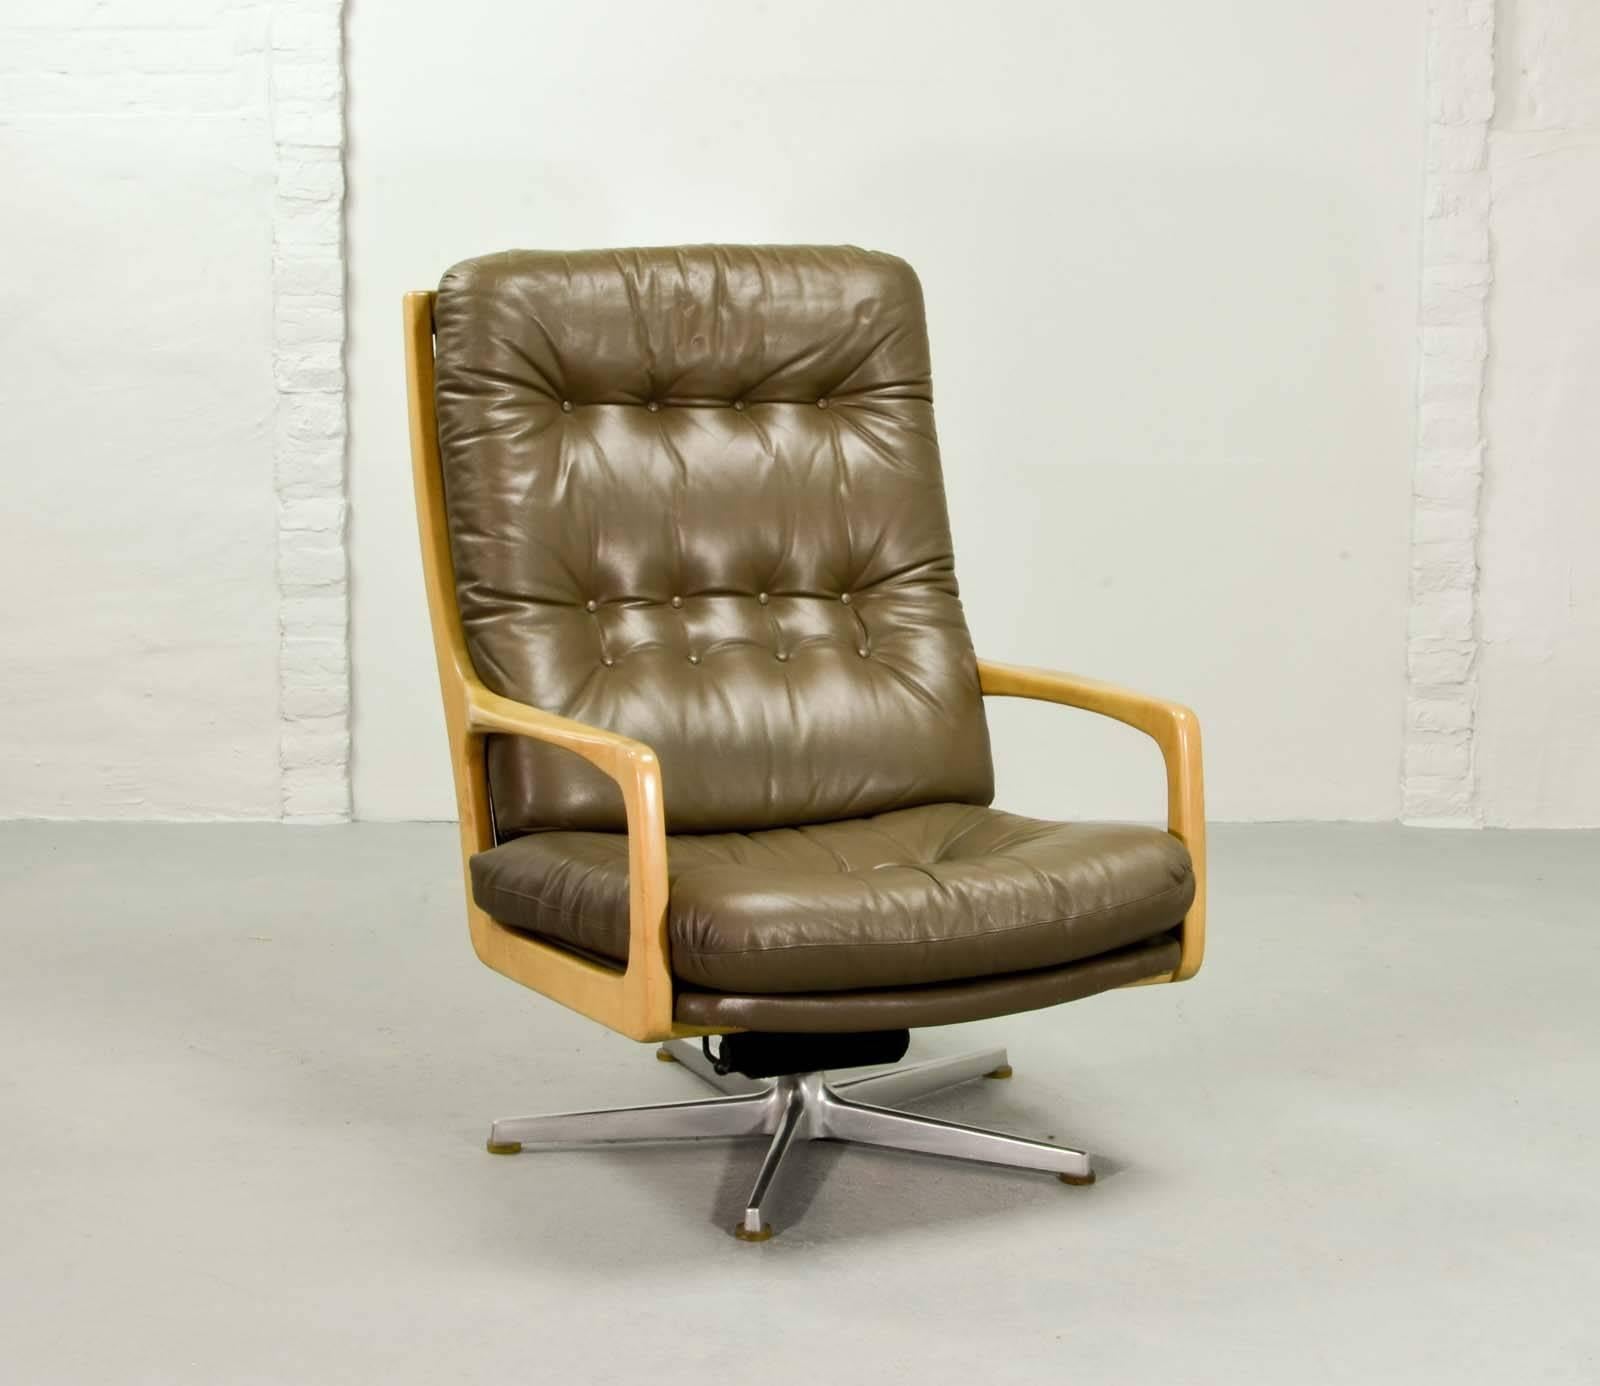 This leather swivel lounge chair originates from the 1970s and was designed by Eugen Schmidt, Germany. It is made from a fine constructed wooden frame with armrests on a stainless steel polished pedestal and features a camel brown colored leather